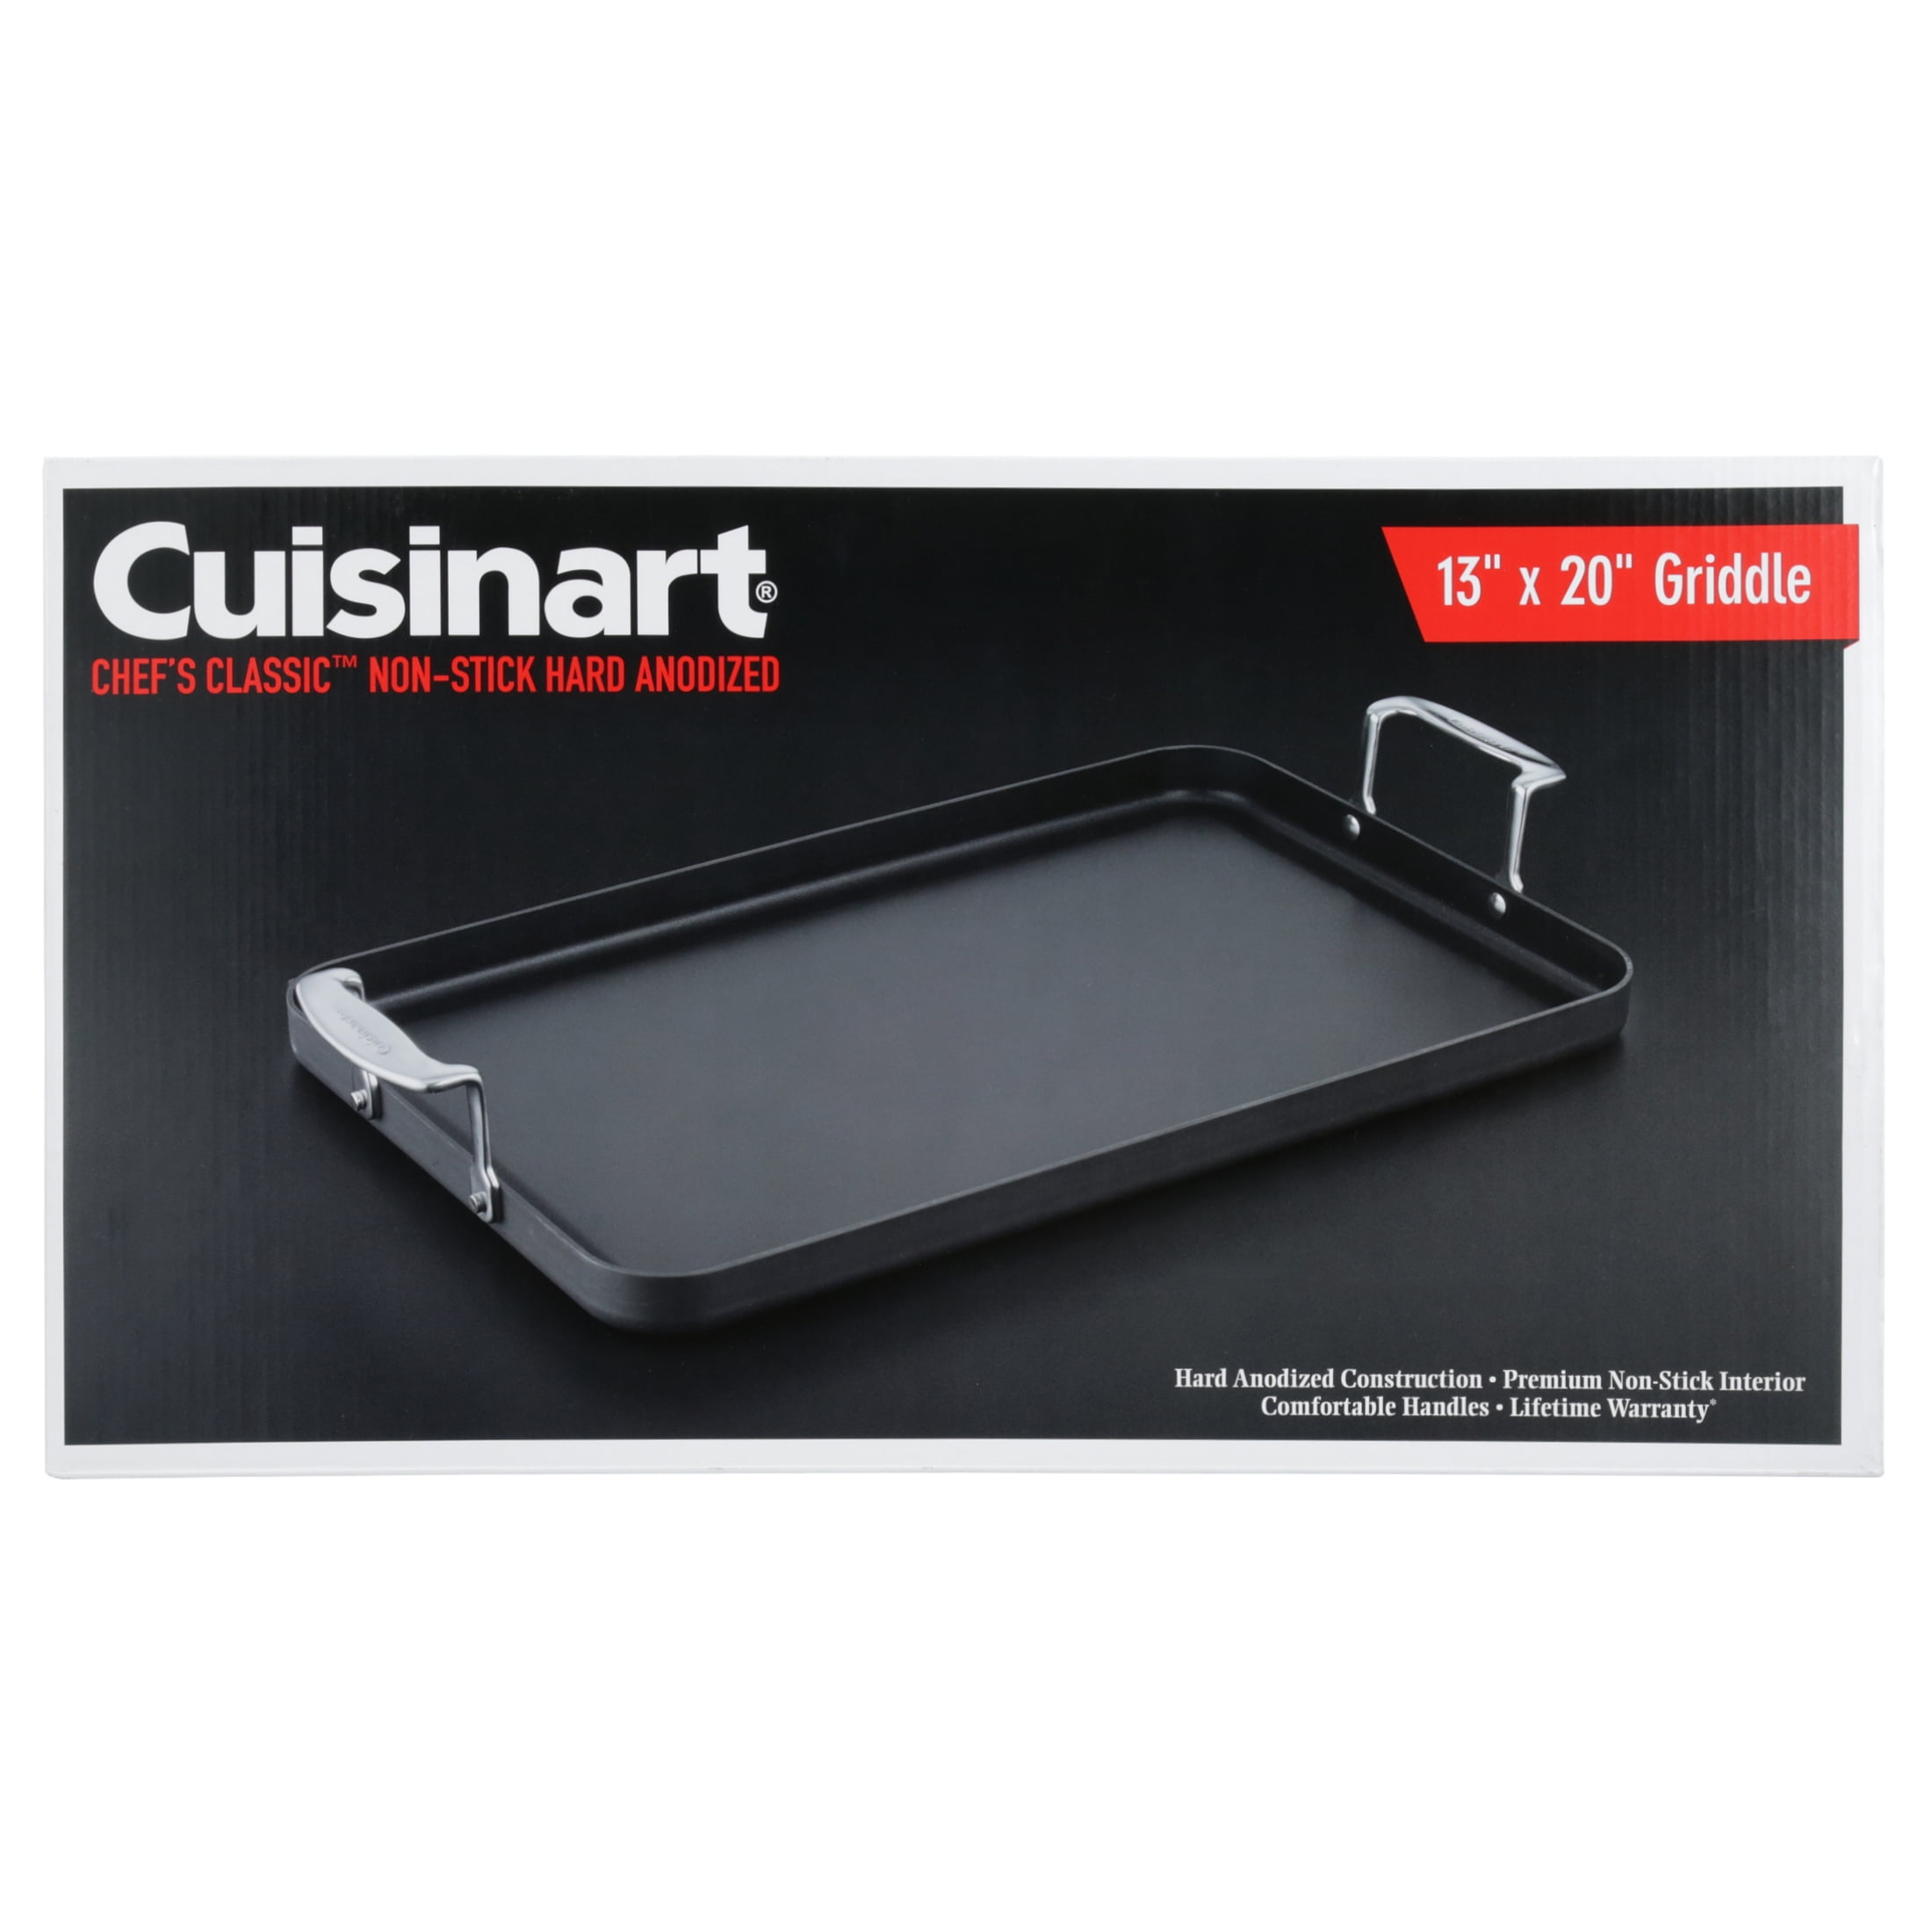 Cuisinart Double Burner Griddle, Chef's Classic Nonstick Hard Anodized,  Stainless Steel, 655-35 13-Inch x 20-Inch